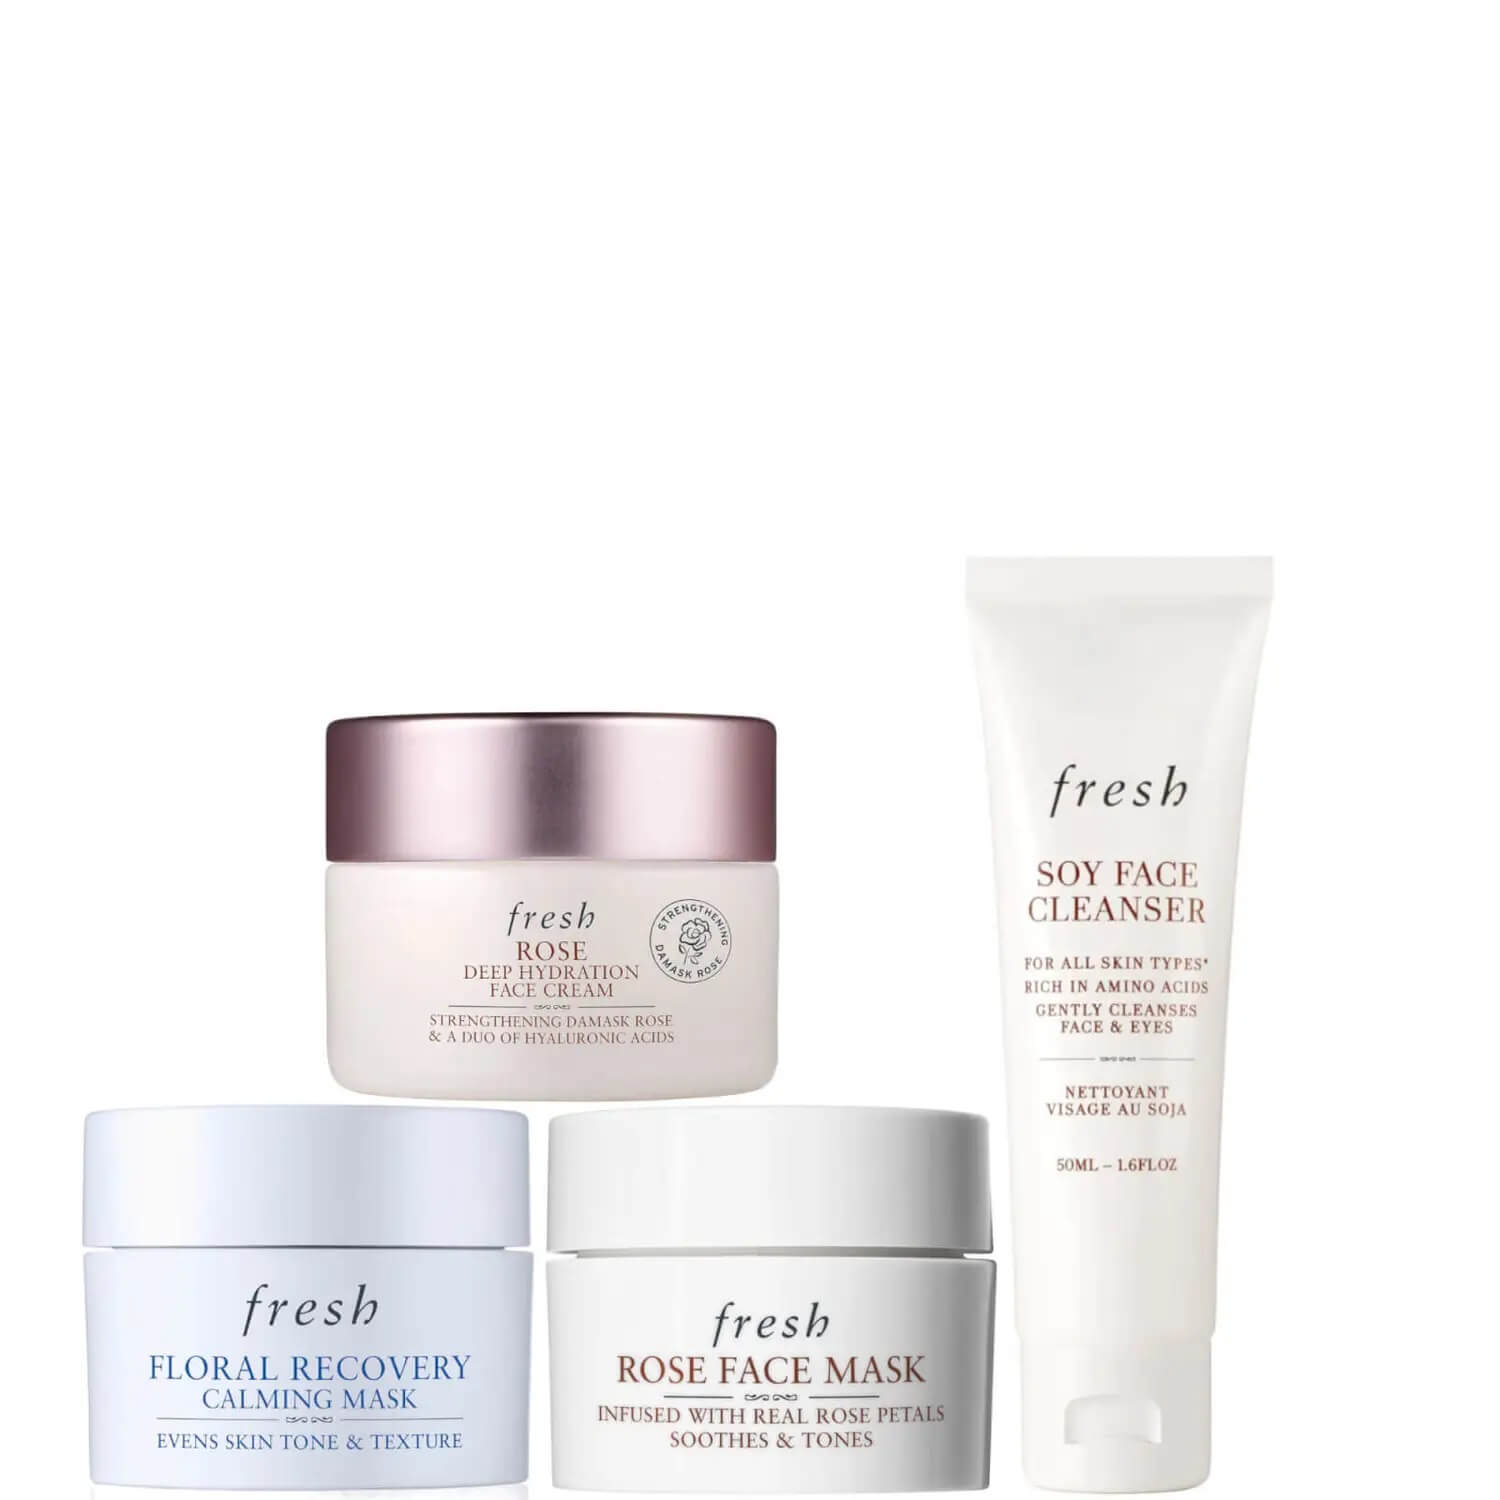 fresh ' SOY FACE fresh 2 CLEANSER RomSE % @ FOR ALL SKIN TYPES DEEPCIS C Ean e RICH IN AMINO ACIDS STRENGTHENING 0 GENTLY CLEANSES N O DRONIE ATDS FACE EYES NETTOYANT VISAGE AU SOJA 50ML - L6FLOZ fresh FLORAL RECOVERY EVENS SKIN TONE @;,TEXTURE INFUSED WITH REAL ROSE PE SOOTHES TONES 